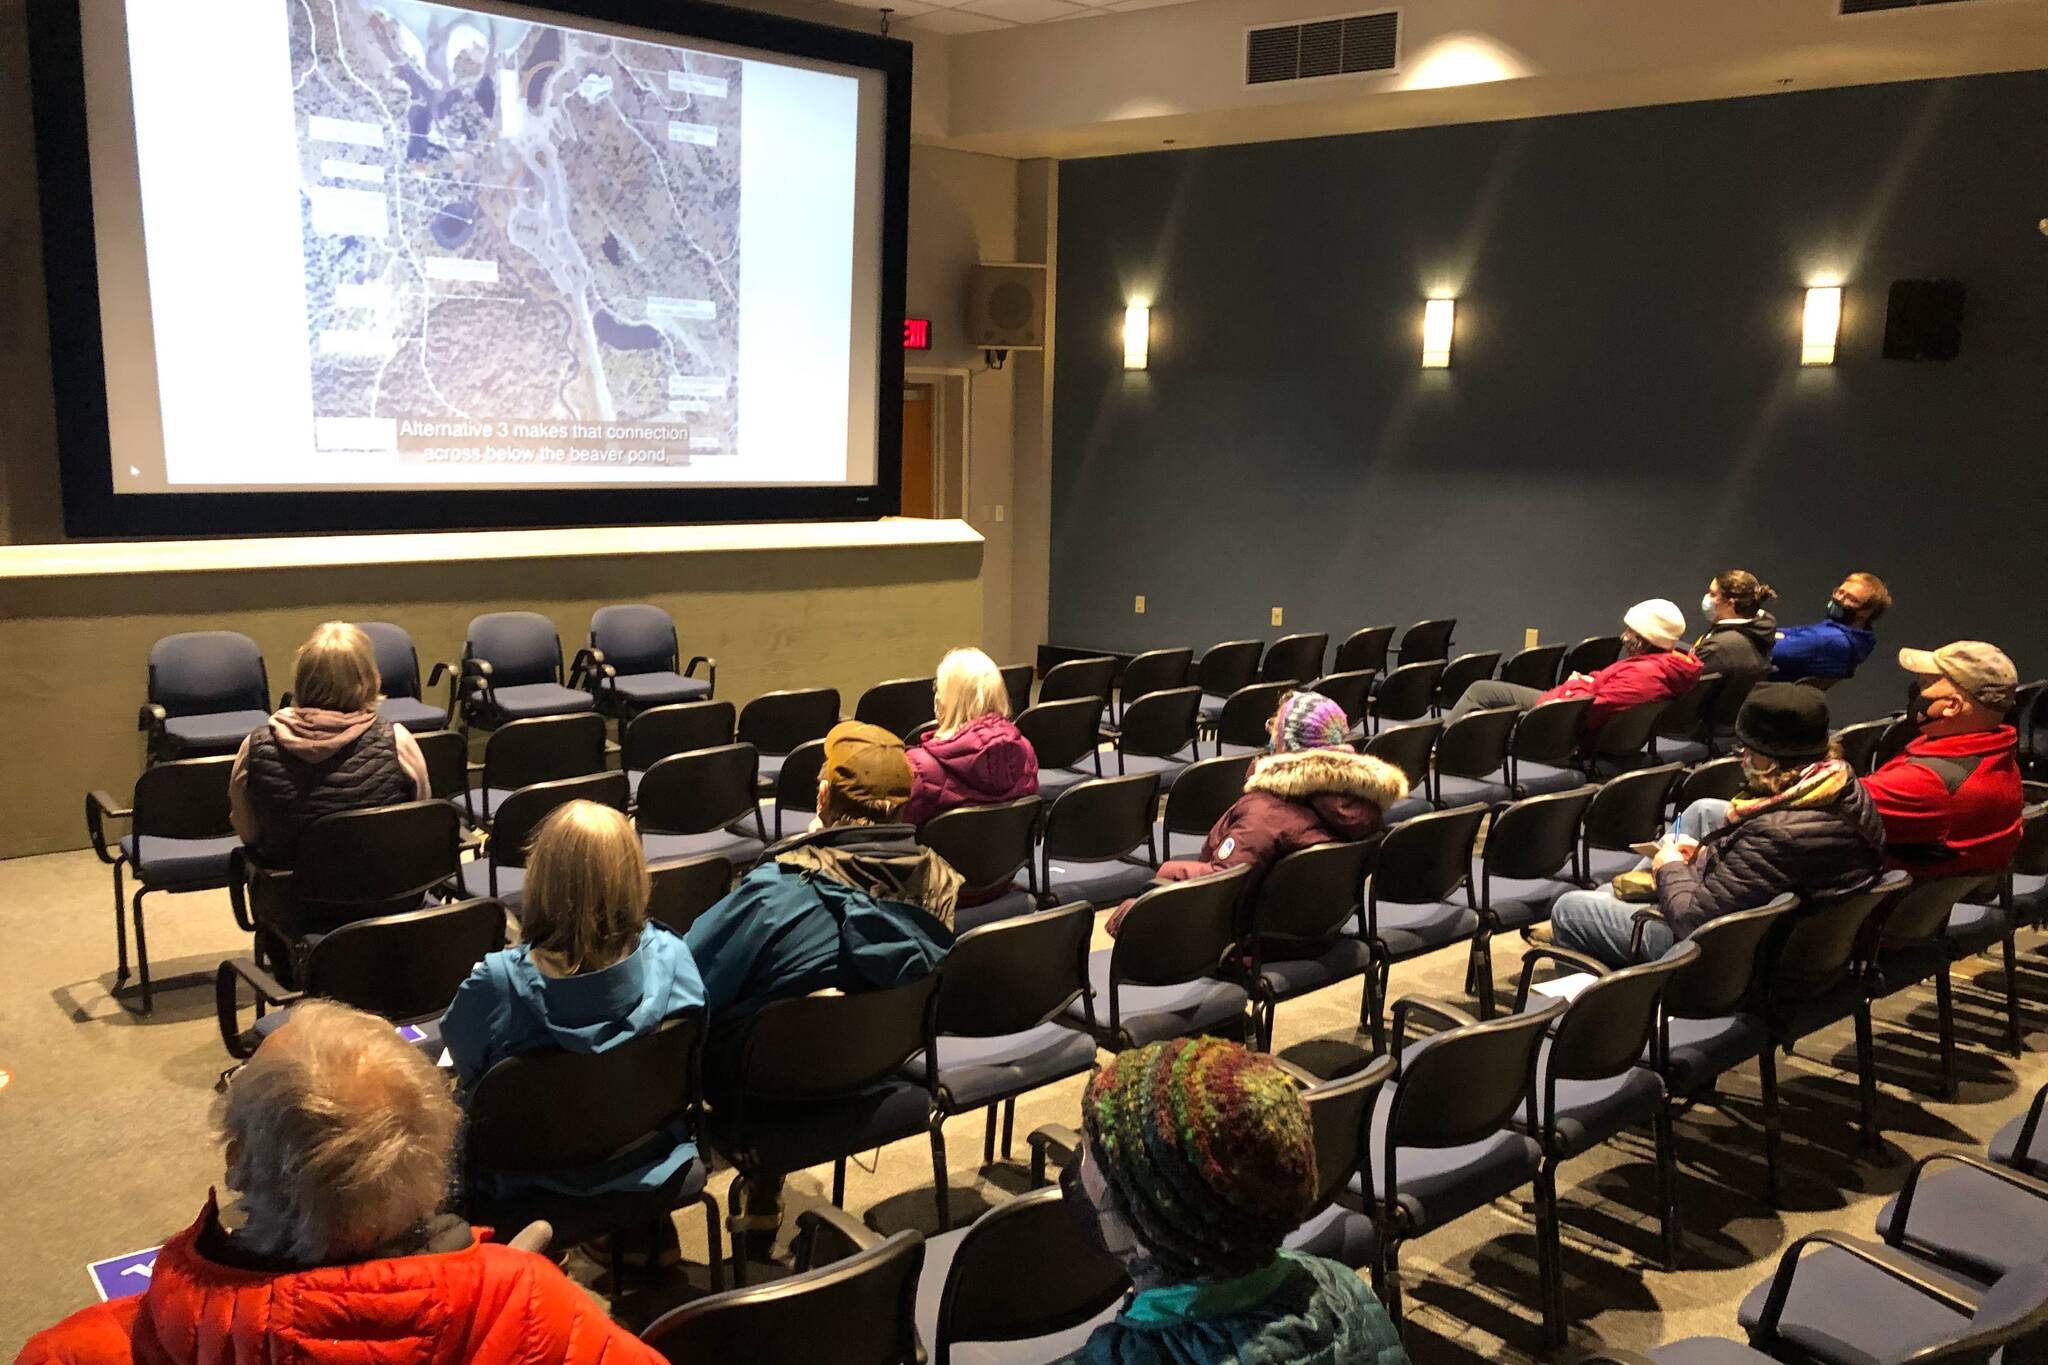 Juneau residents watch a video explaining a planned expansion of the Mendenhall Glacier Visitor Center during an open house at the center on Tuesday, March 15, 2022. (Peter Segall / Juneau Empire)